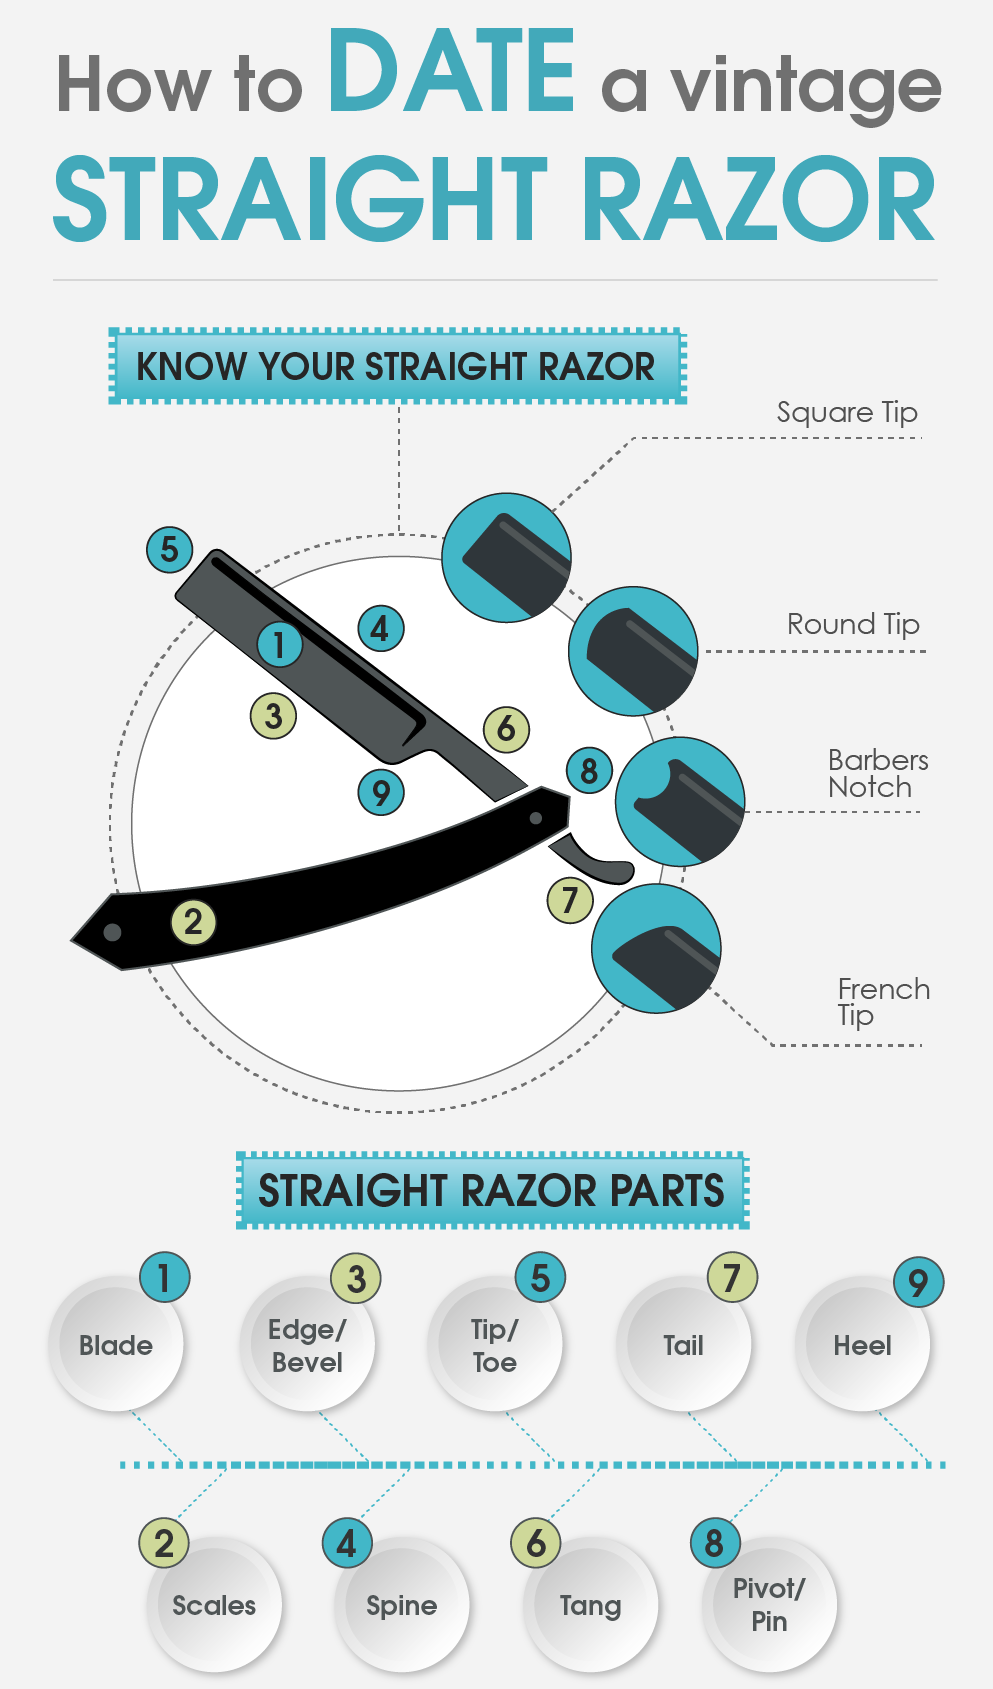 How to date a vintage Straight Razor